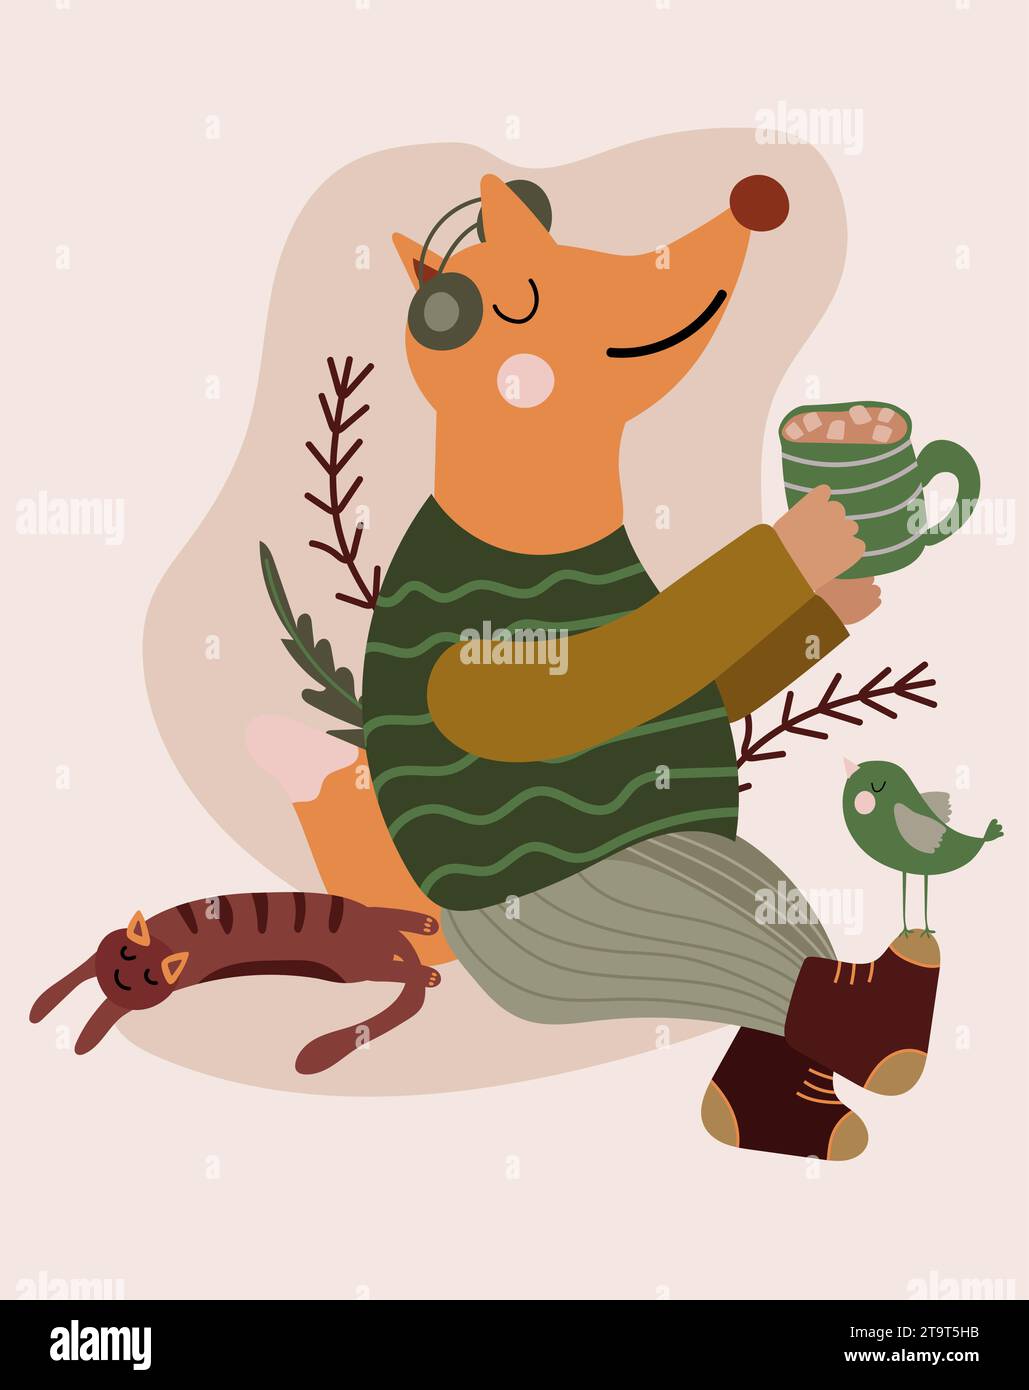 Cute illustration with red fox drinking hot tea and listening to music, lazy cat, bird. Perfect vector design for posters, greeting cards and various creative projects. Vector.  Stock Vector